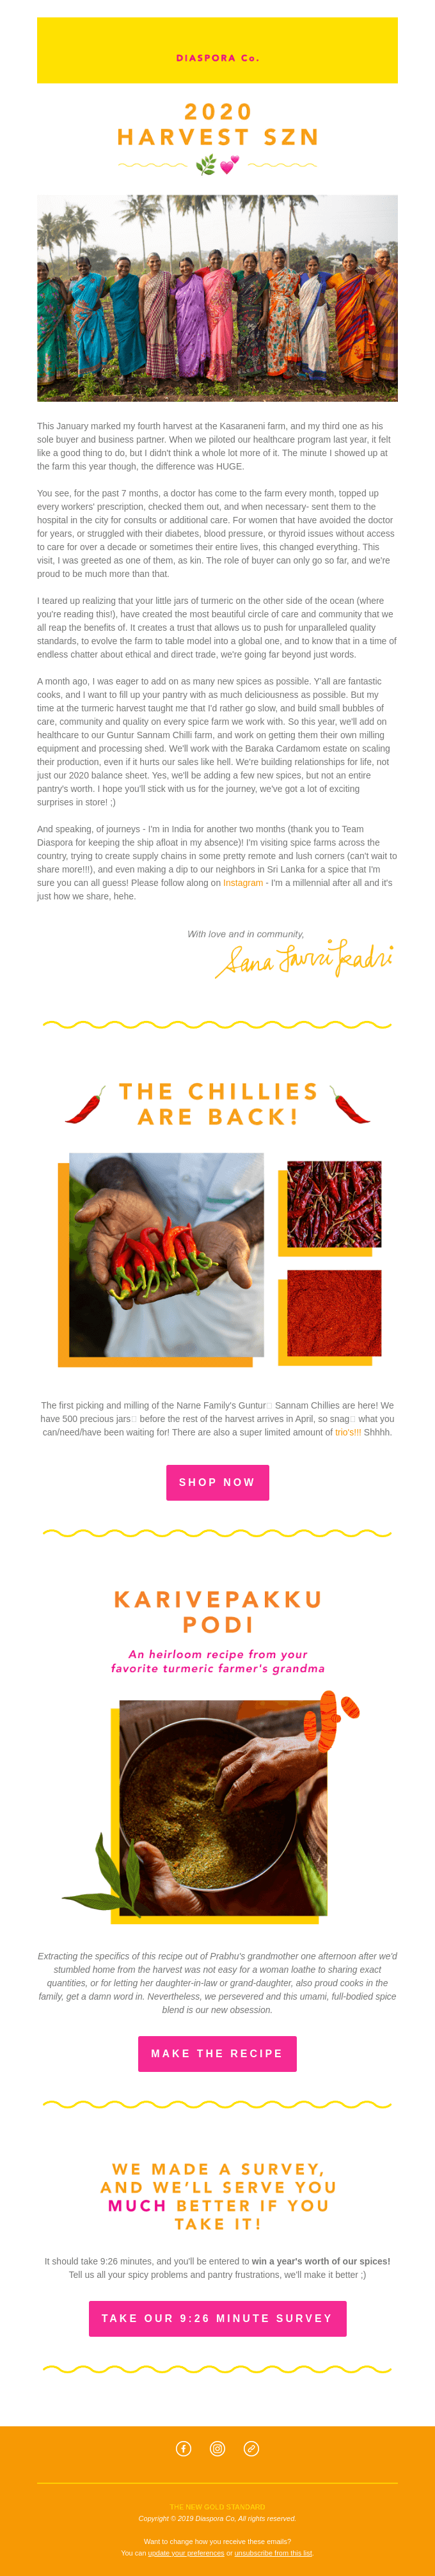 Your fave chillies are back! 🔥